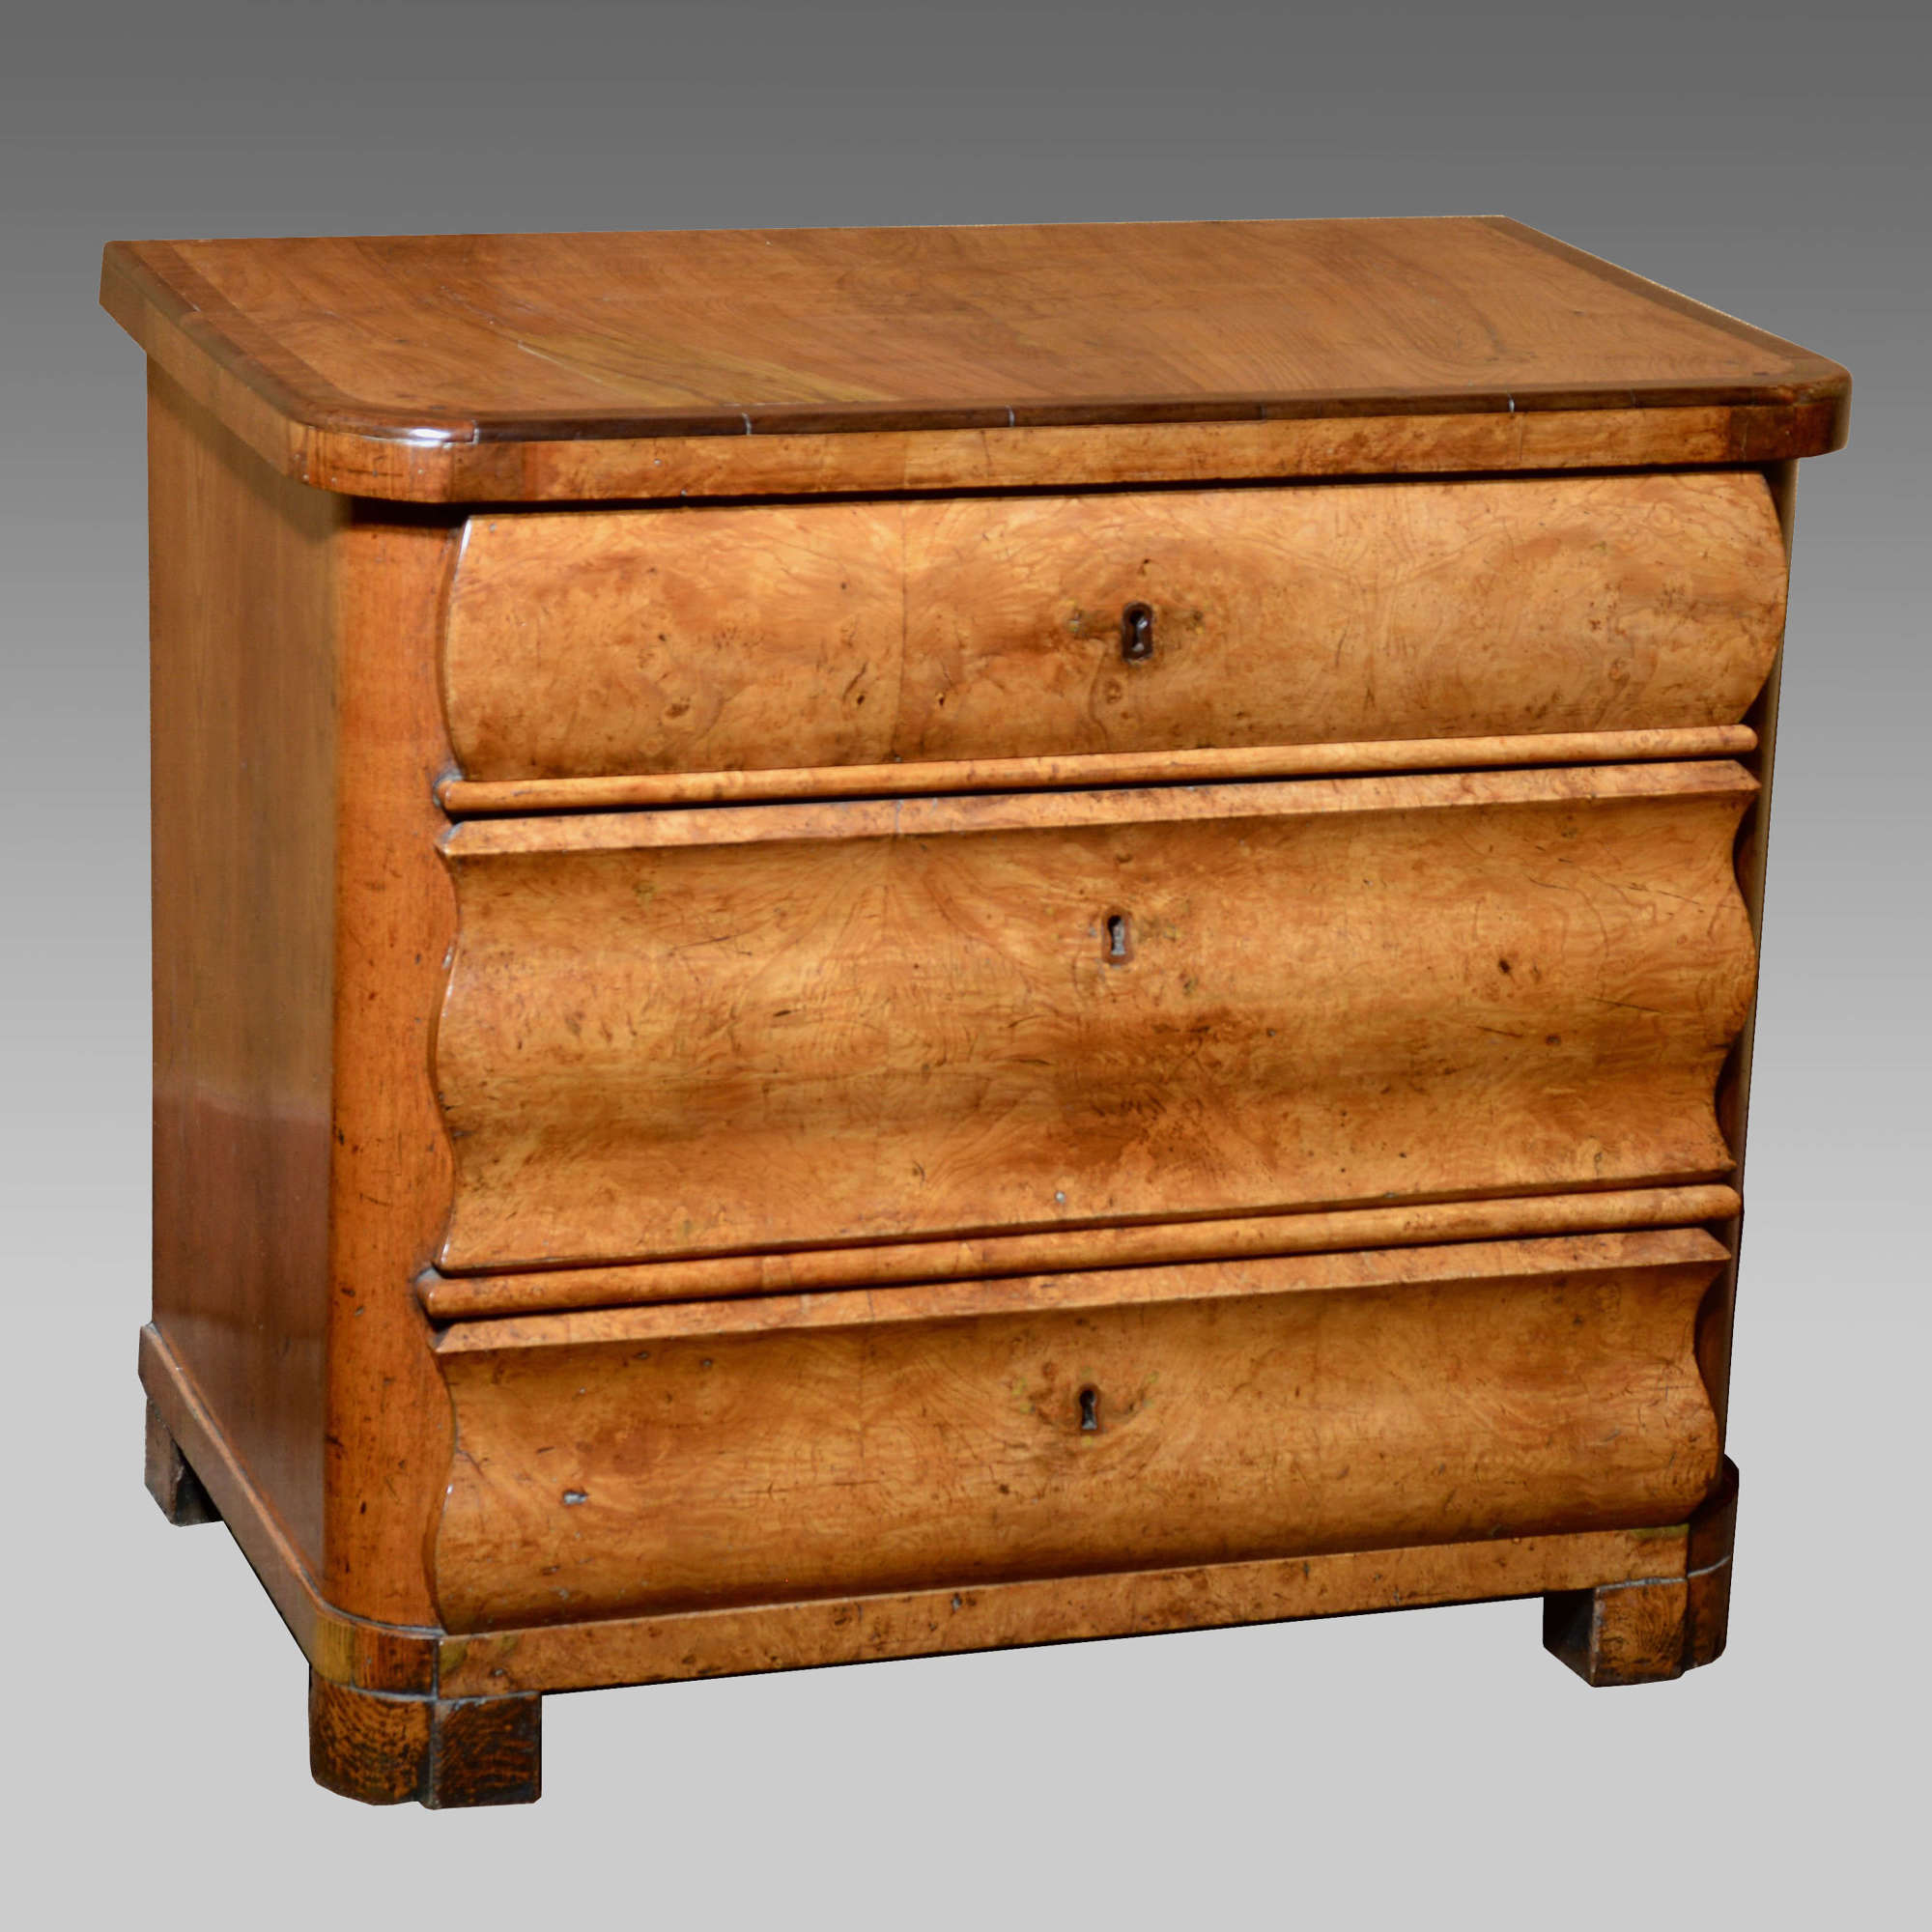 Small 19th century Scandinavian ash chest of drawers